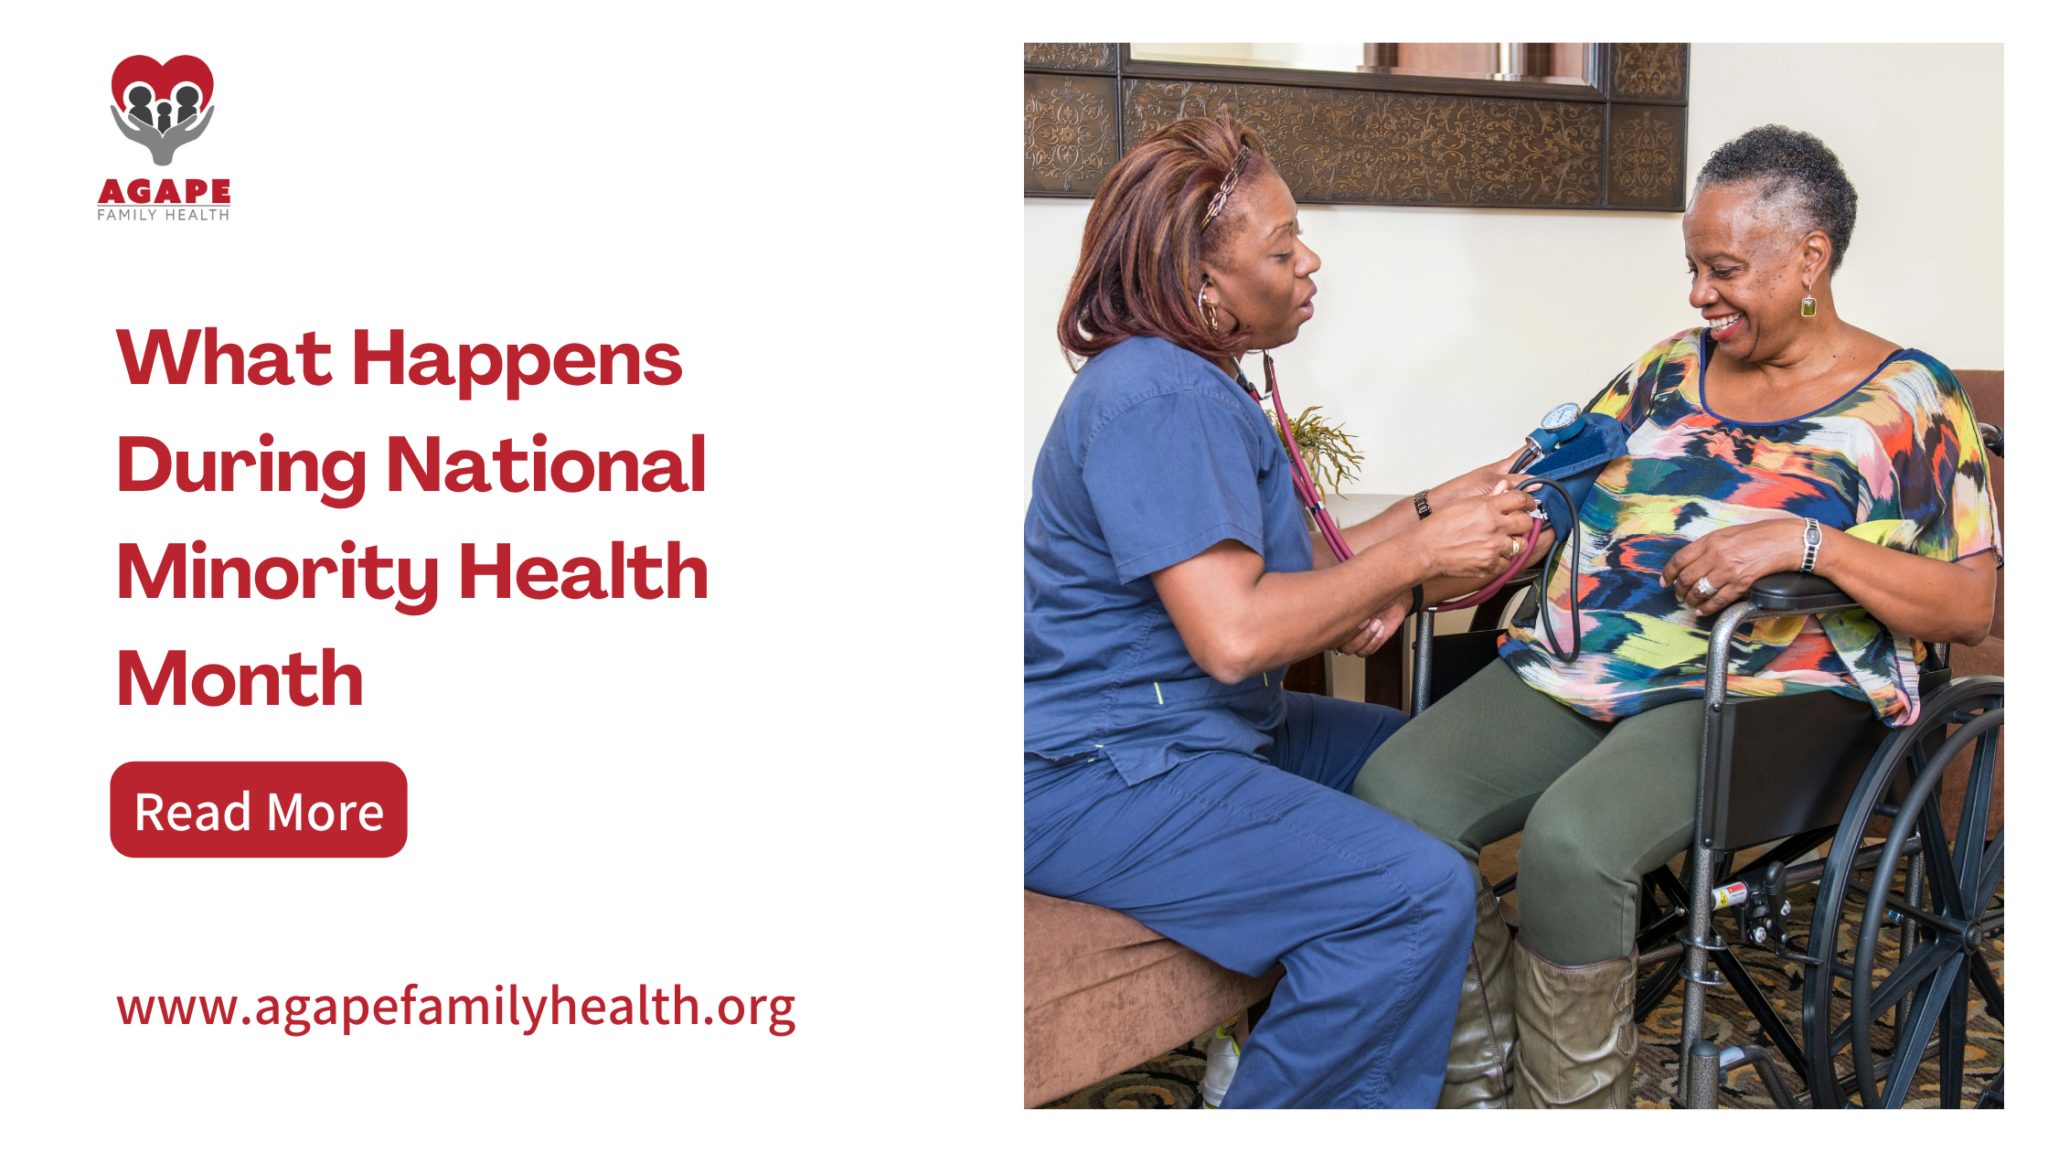 What Happens During National Minority Health Month